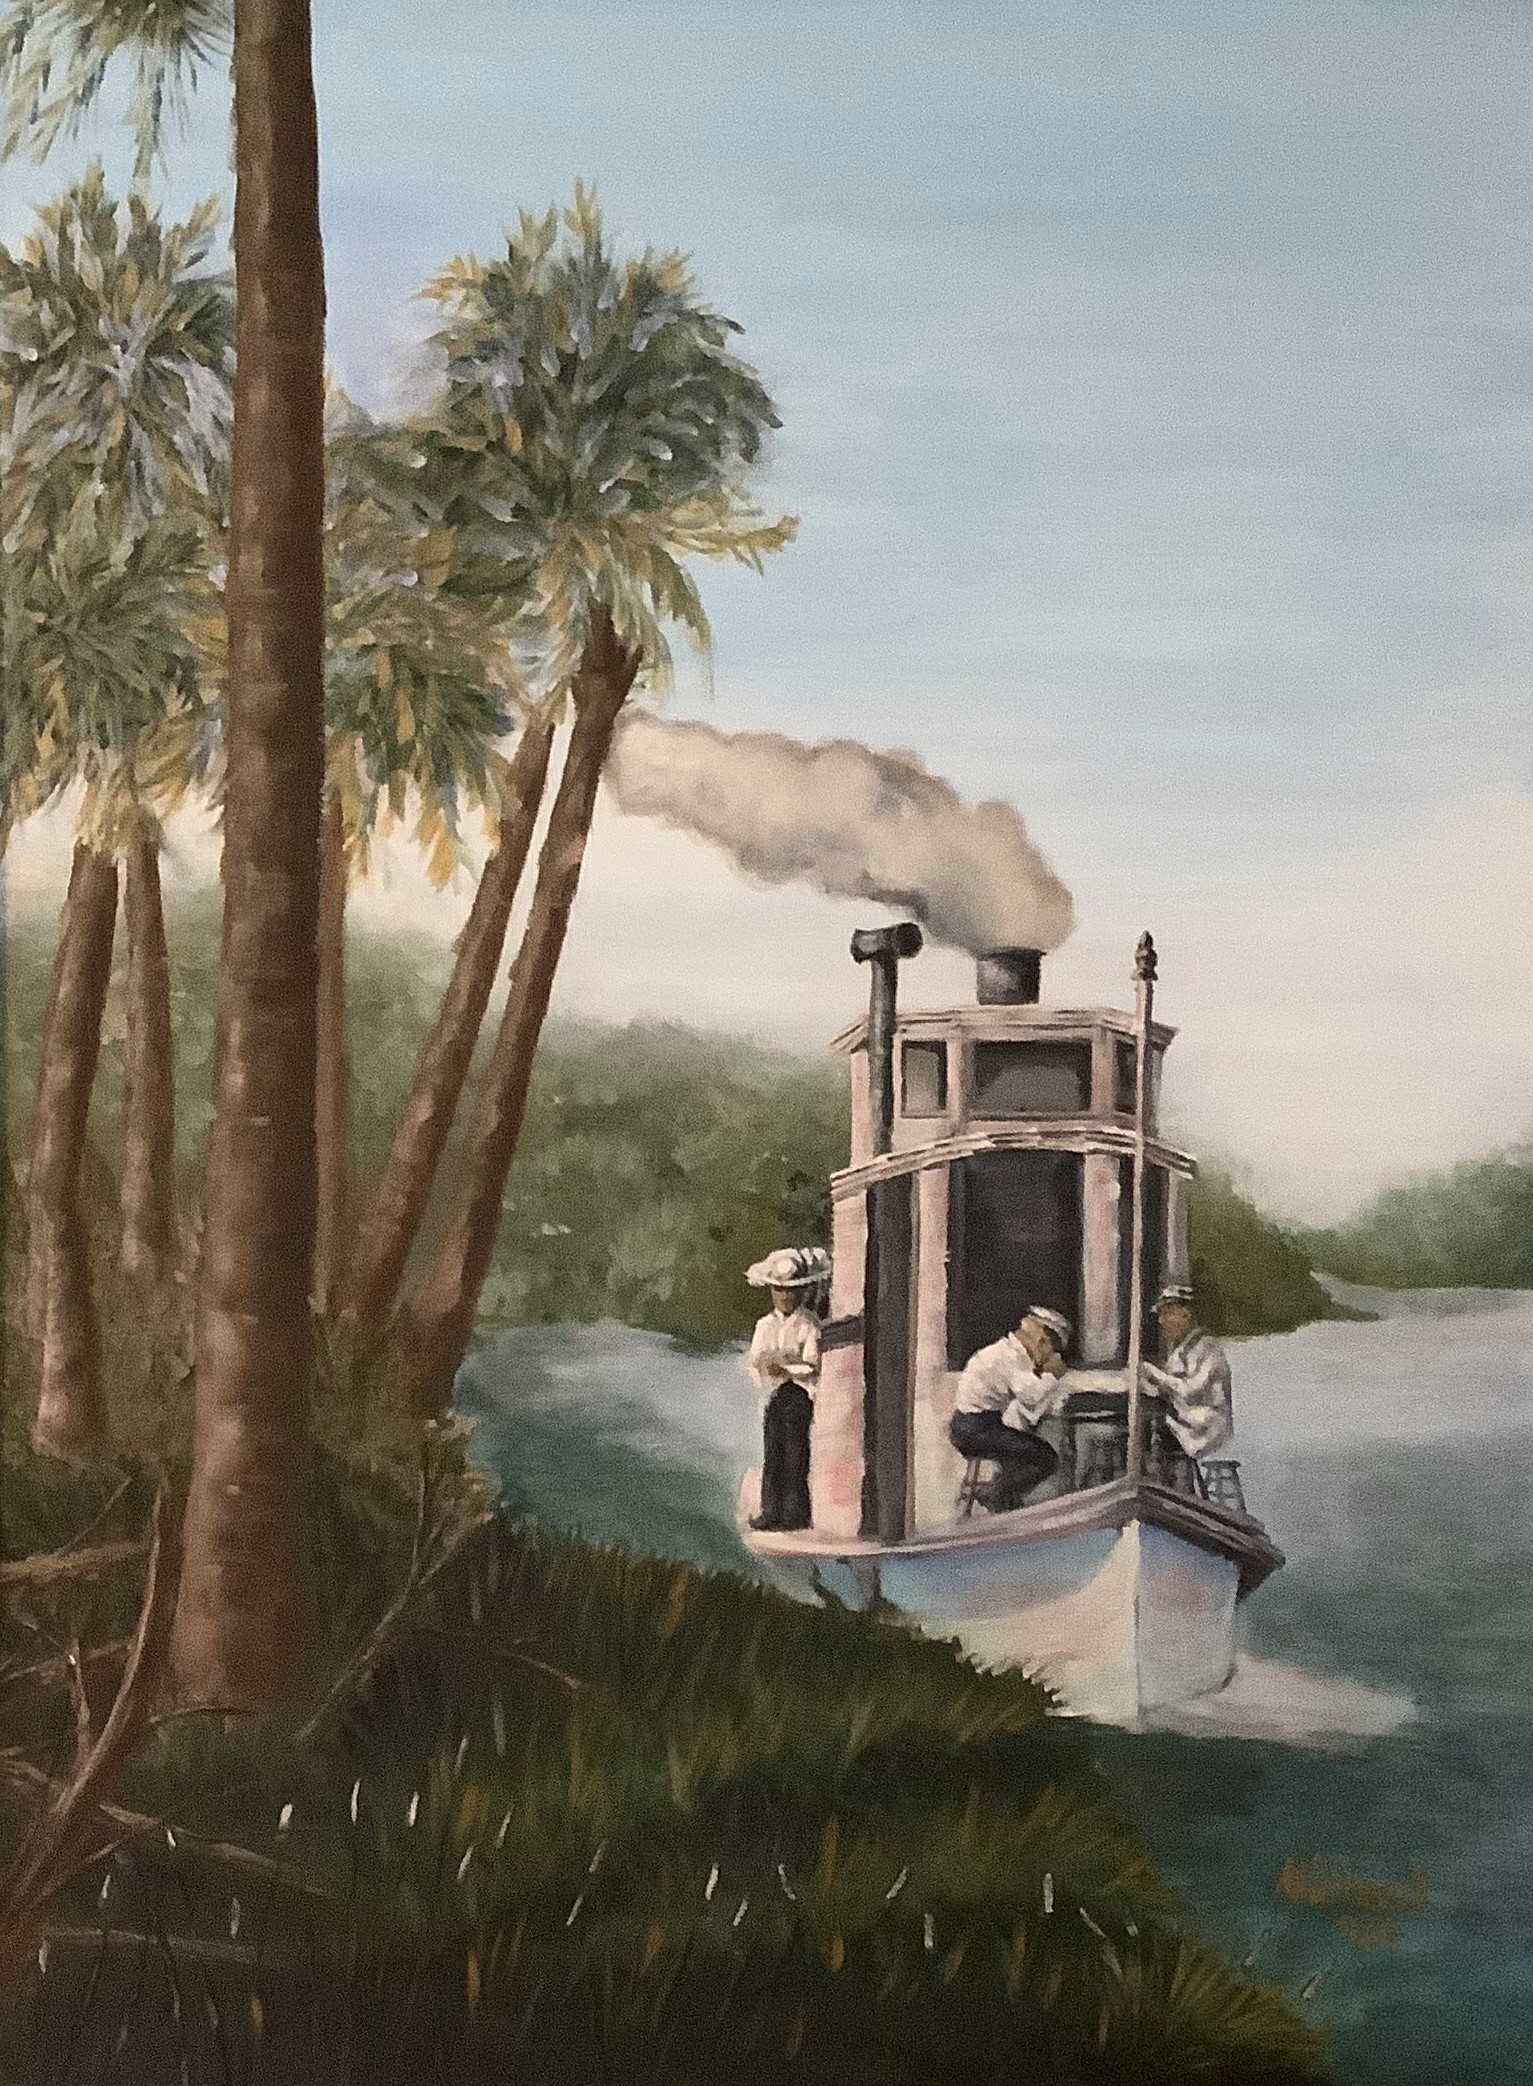 Withlacoochee Steamboat by artist Michael Arnold